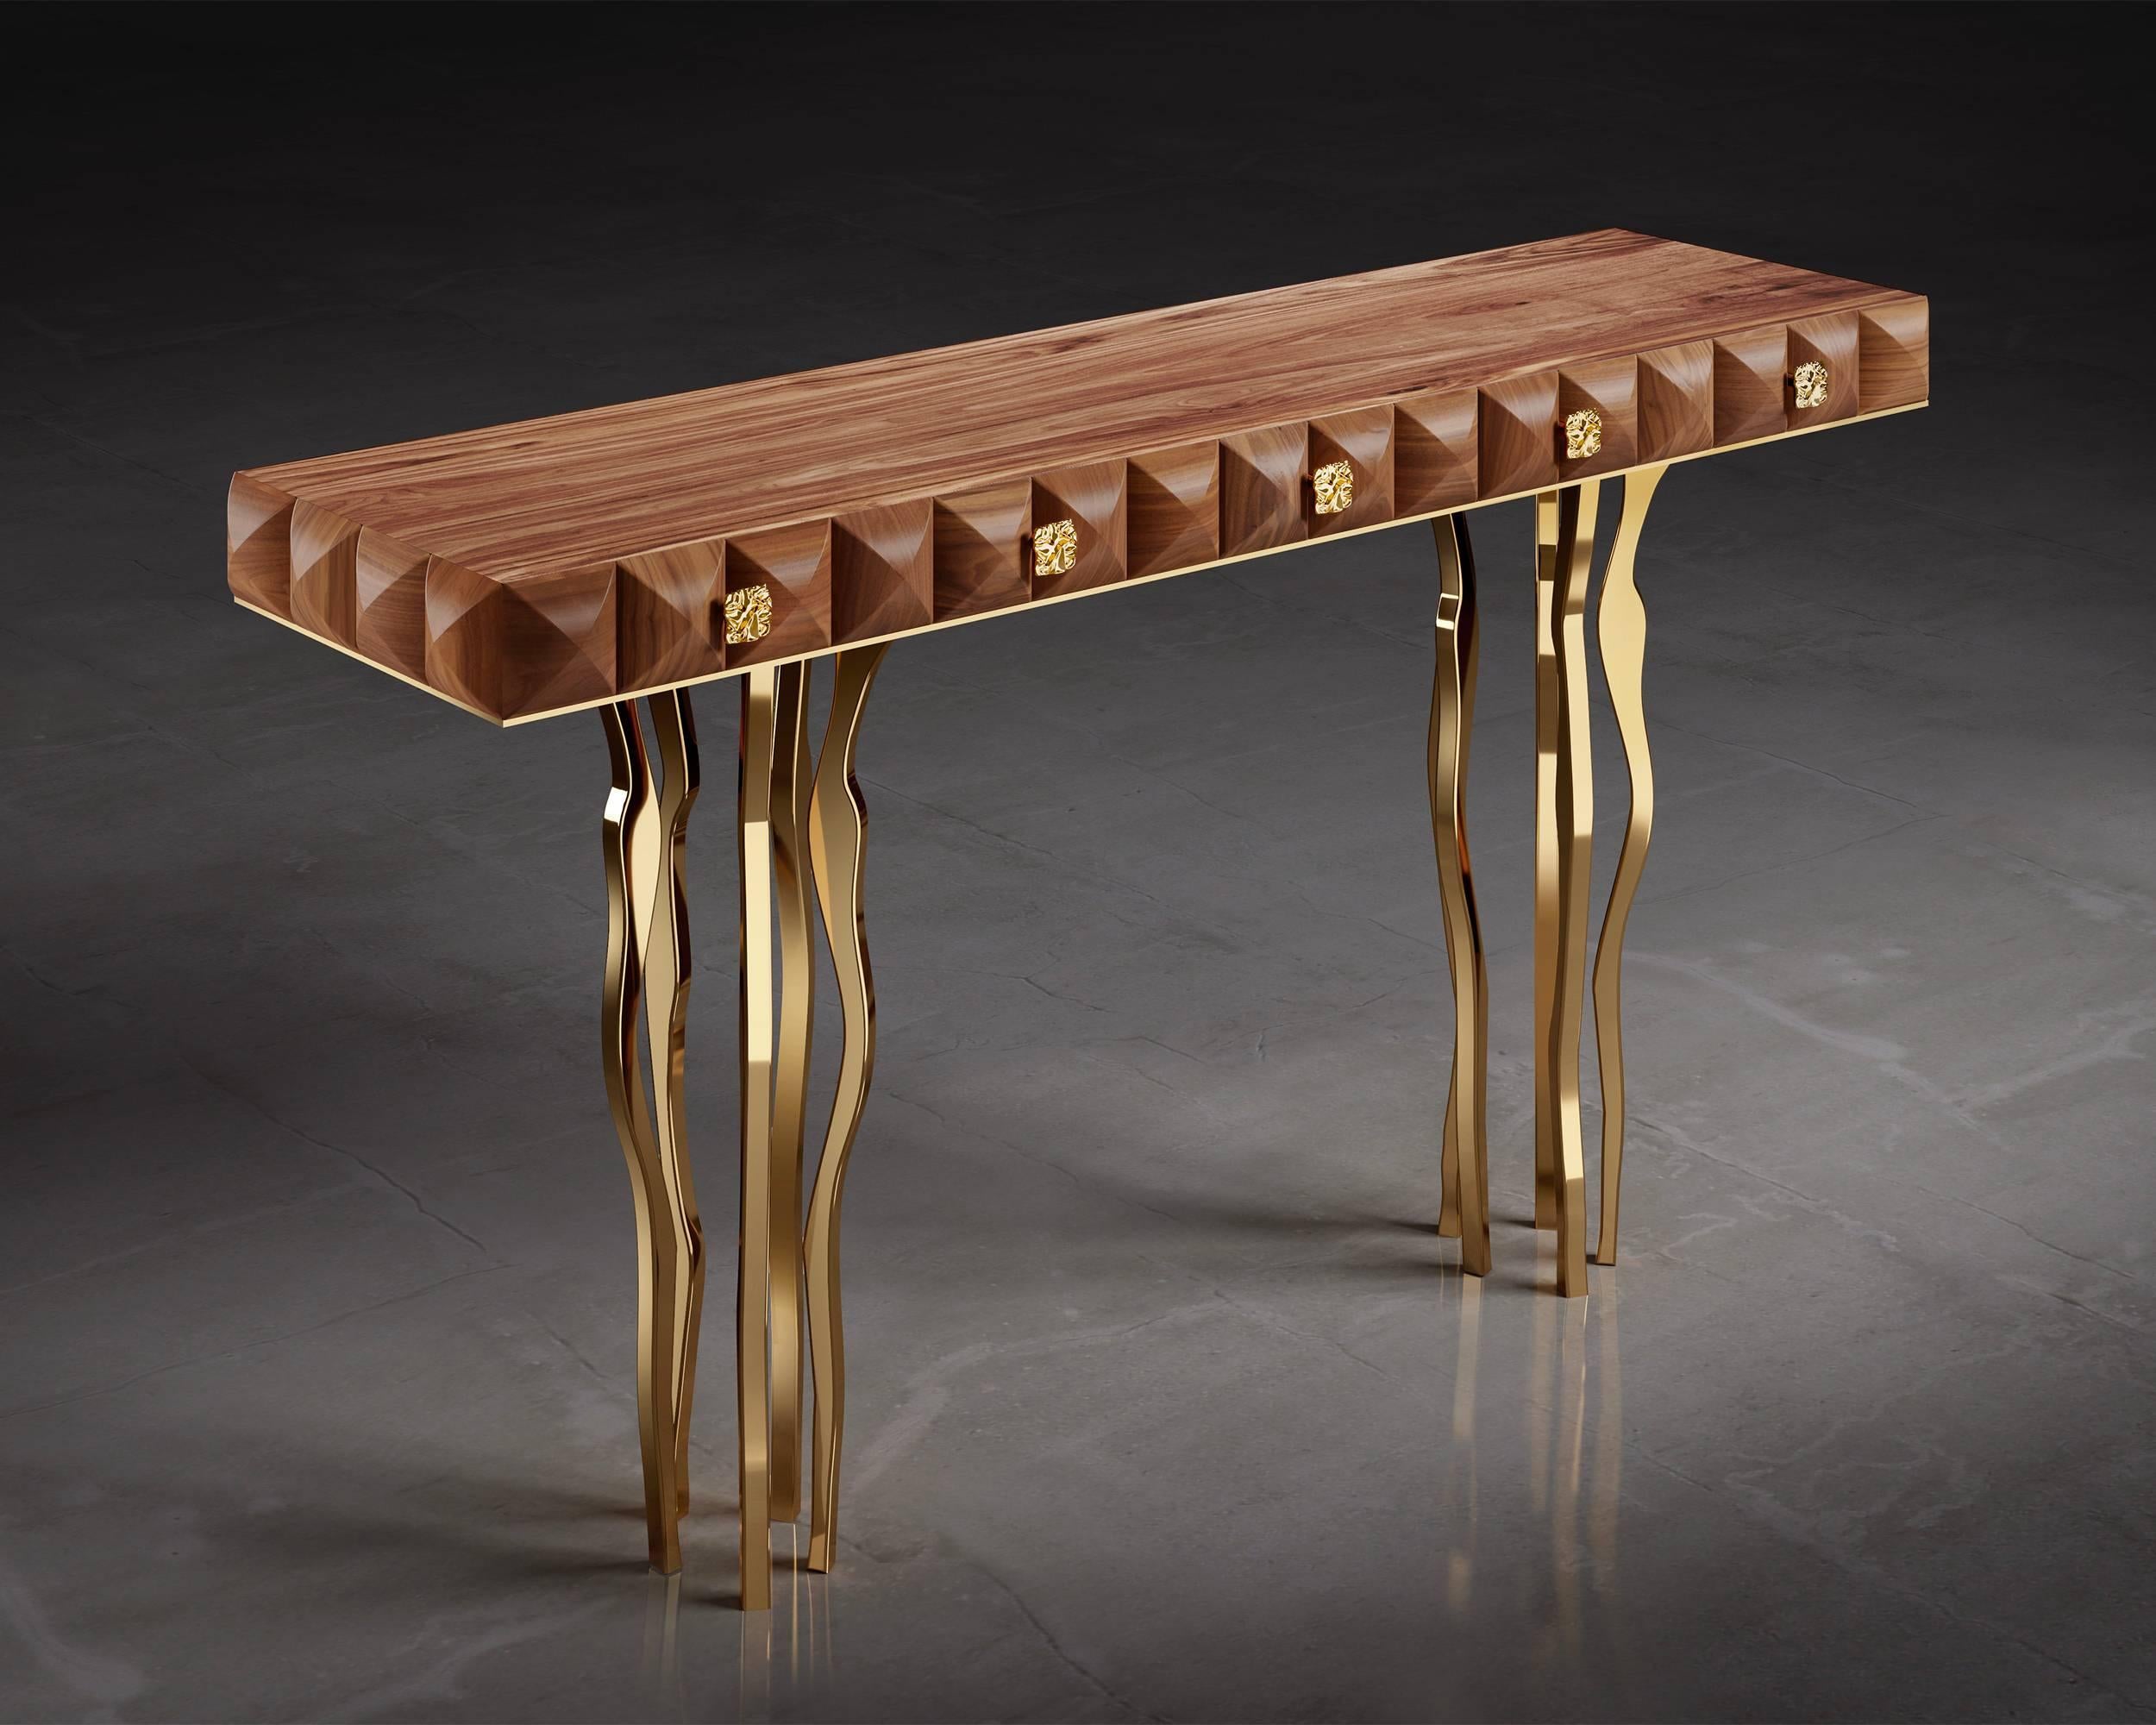 Rigid, strong and impenetrable, like a medieval Florentine palace, it seems to be suspended and floating over an imaginary Arno river. Il Pezzo 10 Console shows off its embossed wood giving it a medieval taste.
The wood shows infinite shades and